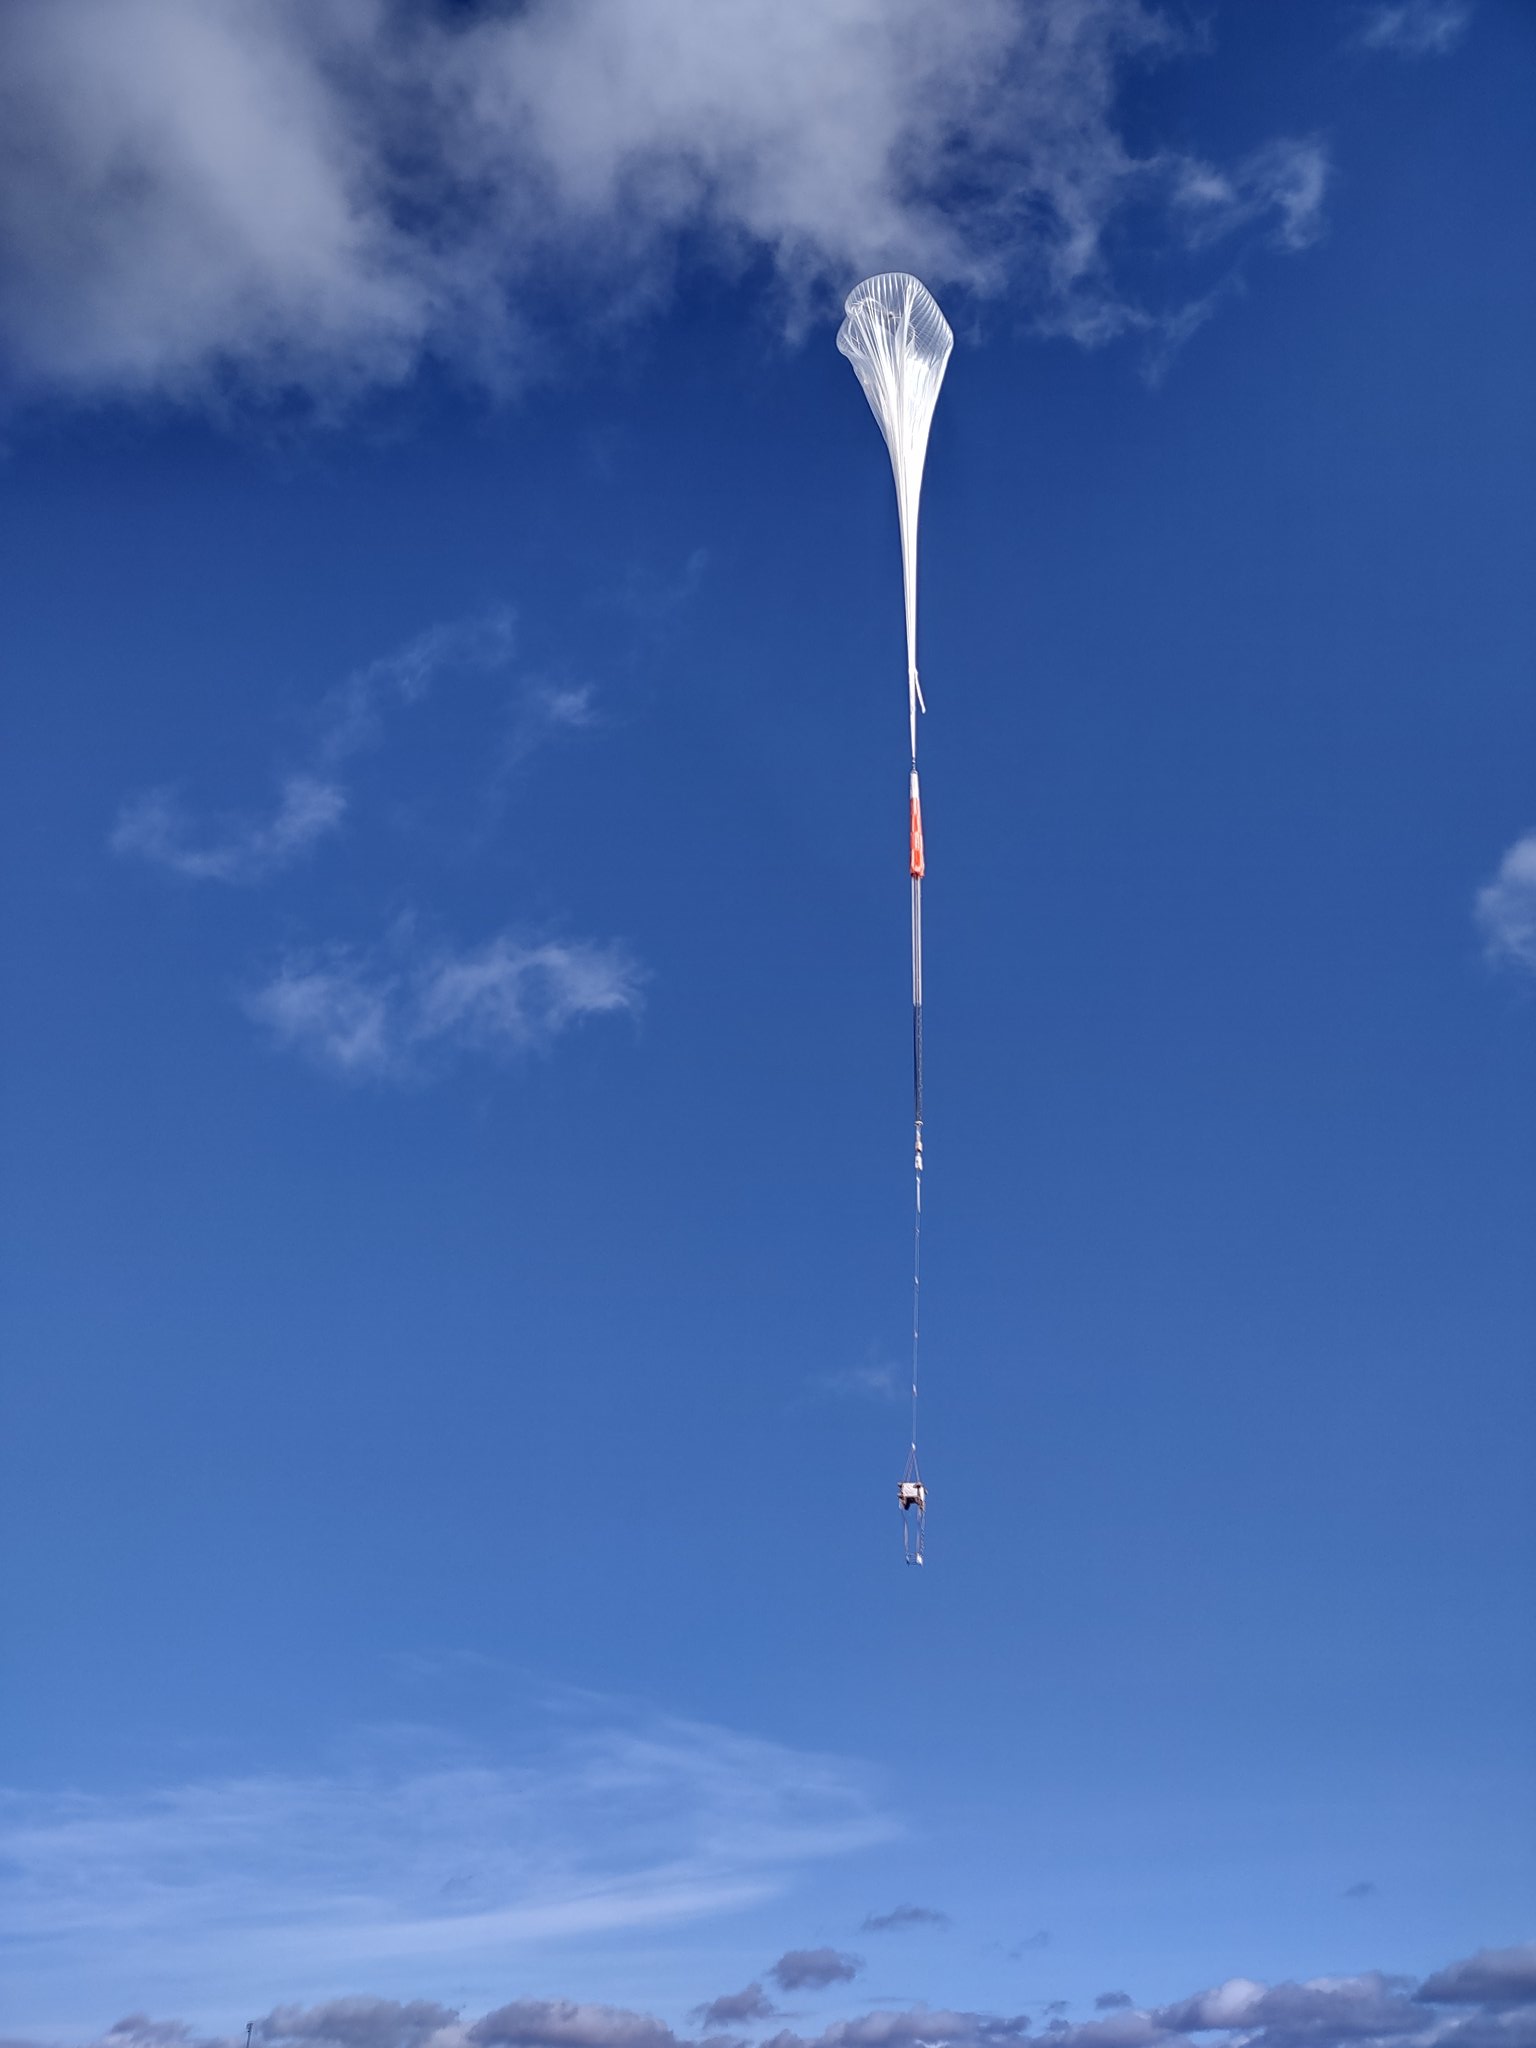 Initial ascent of the balloon after payload release